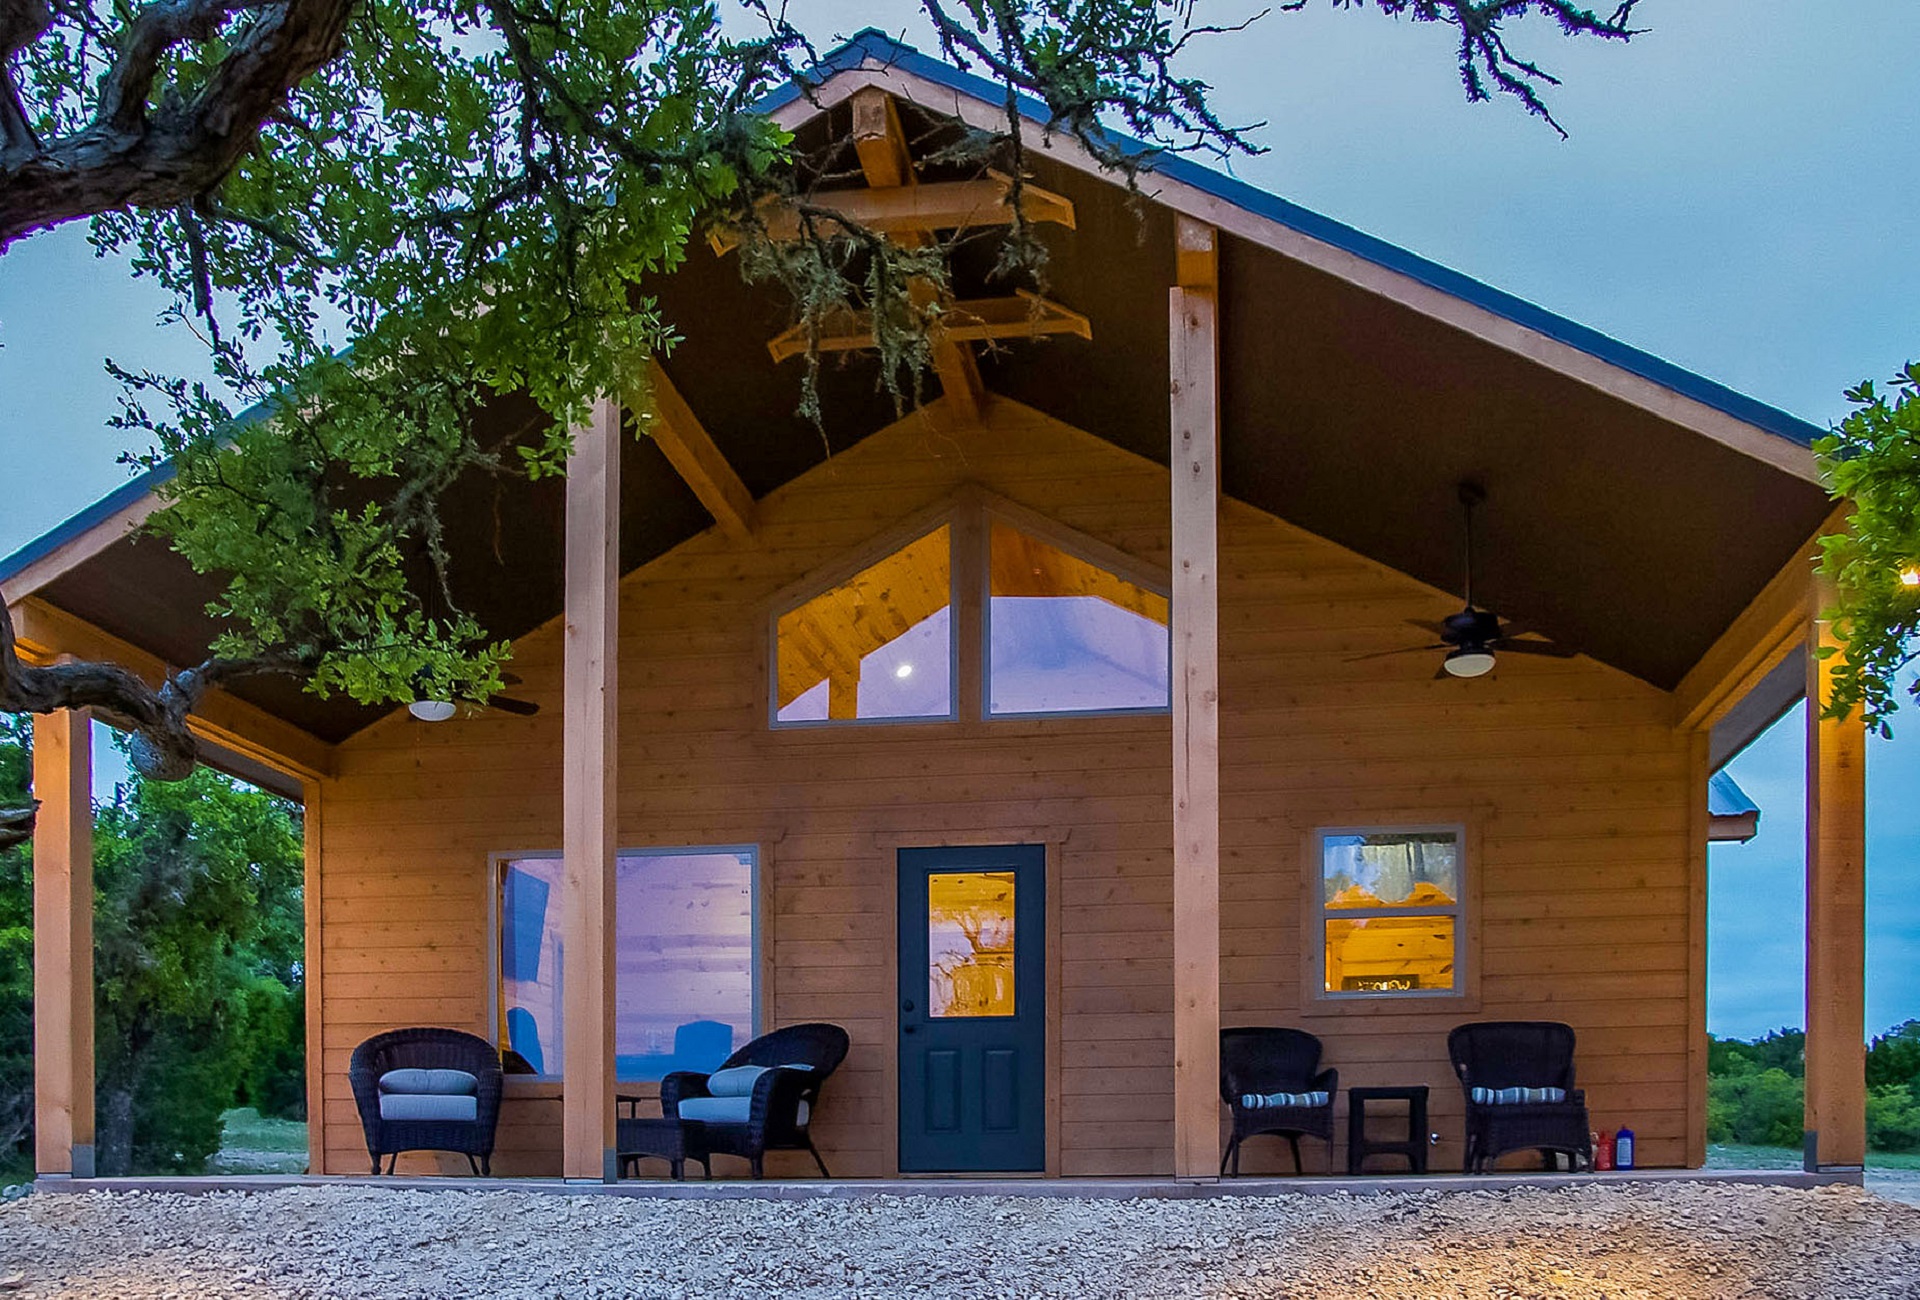 DOMINION AT REAL VALLEY HUNTING RANCH FOR SALE - GUEST CABIN